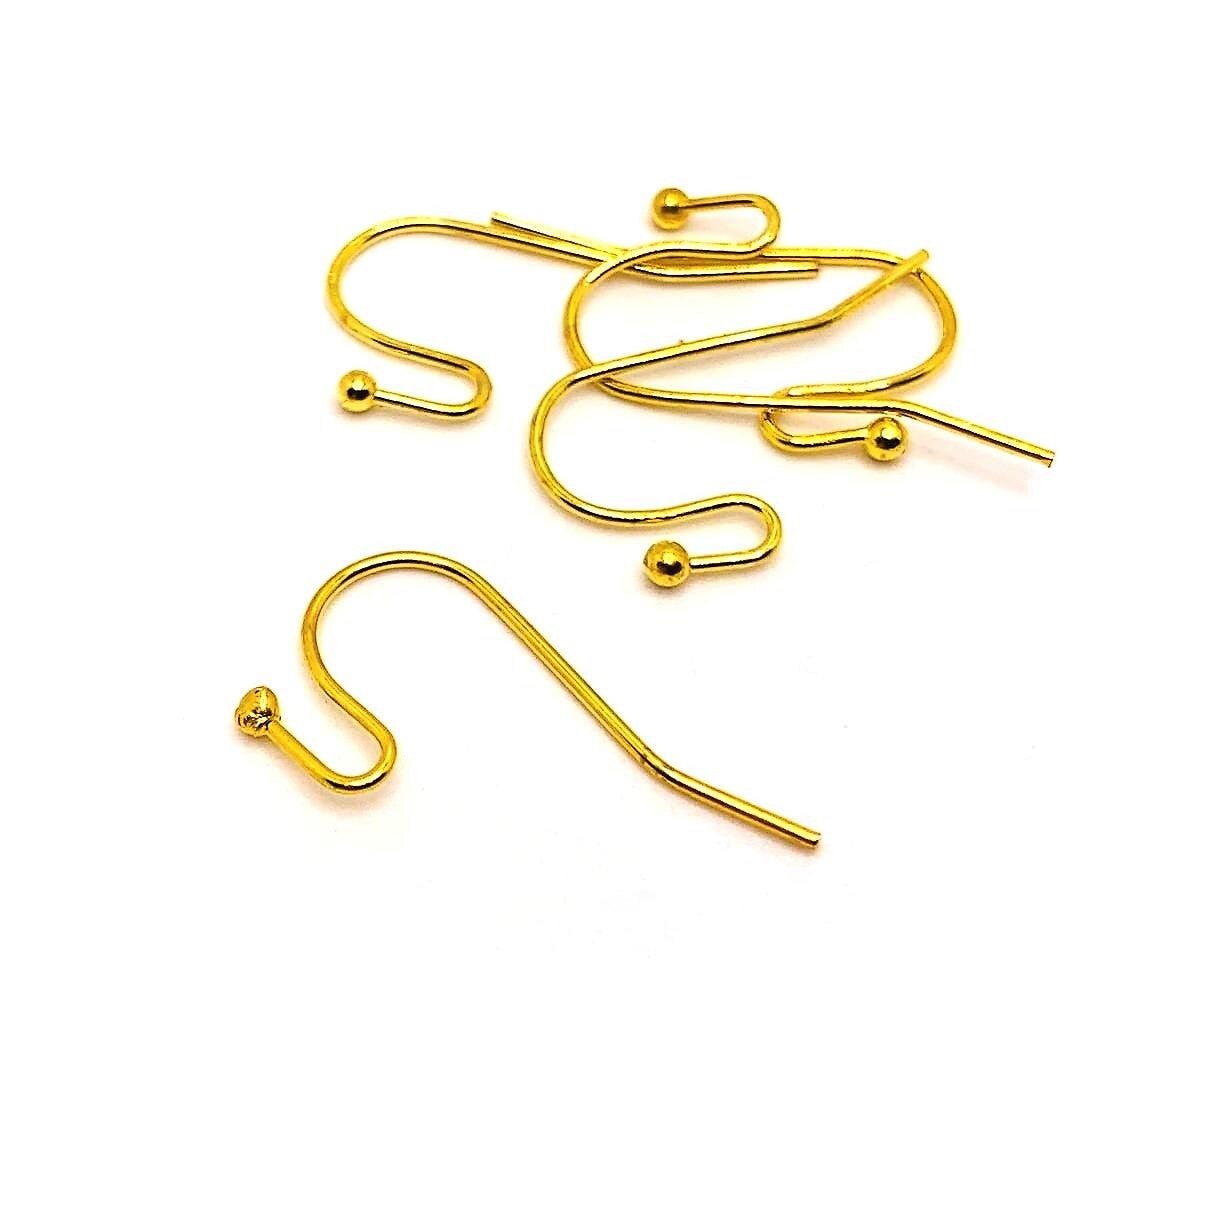 100 or 500 Pieces: Gold Plated Shepherd Fish Hook Earring Wires